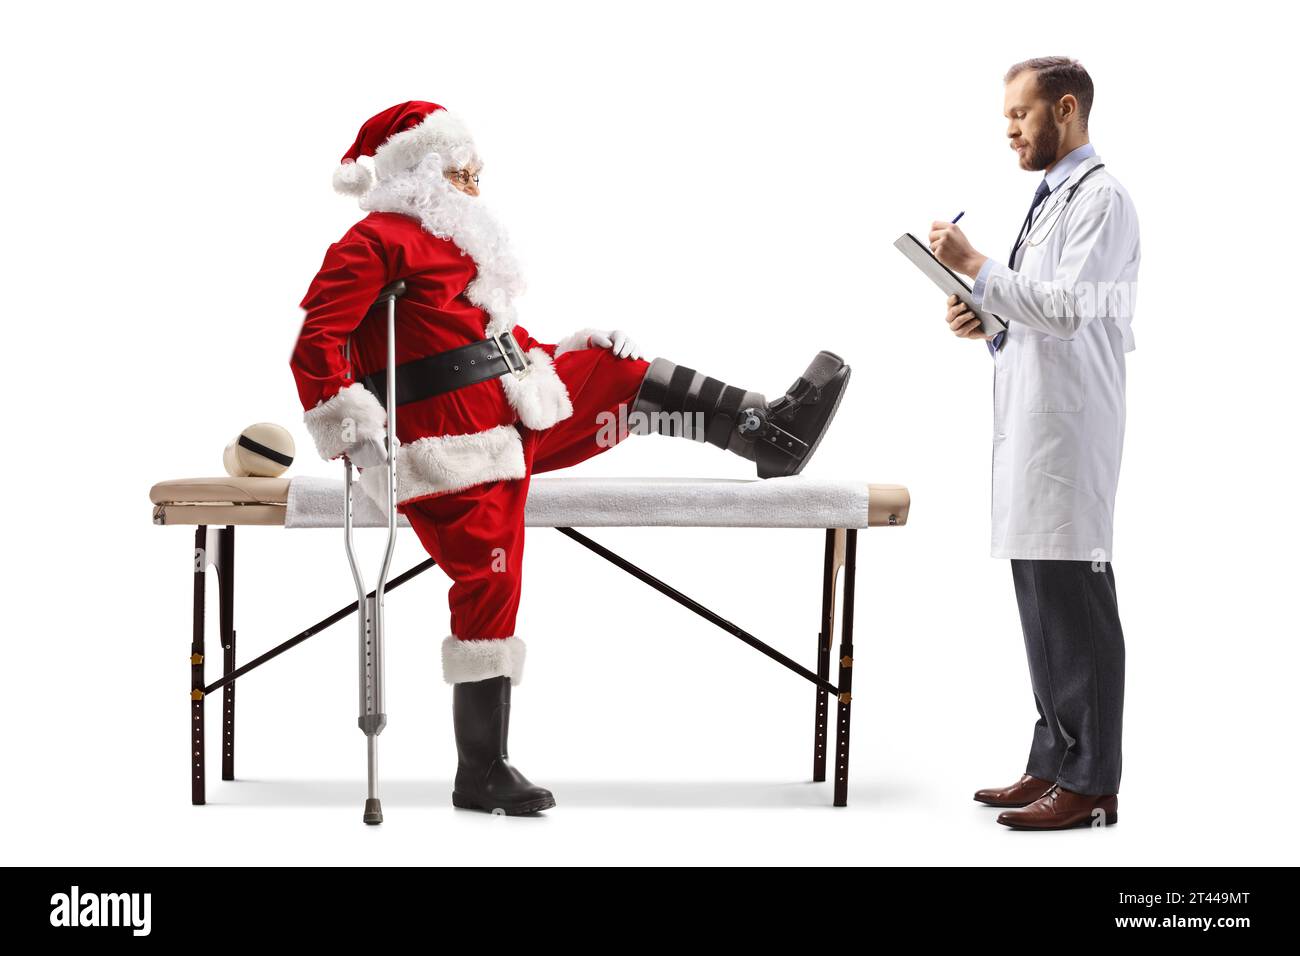 Doctor writing and standing in front of Santa claus with an injured leg isolated on white background Stock Photo